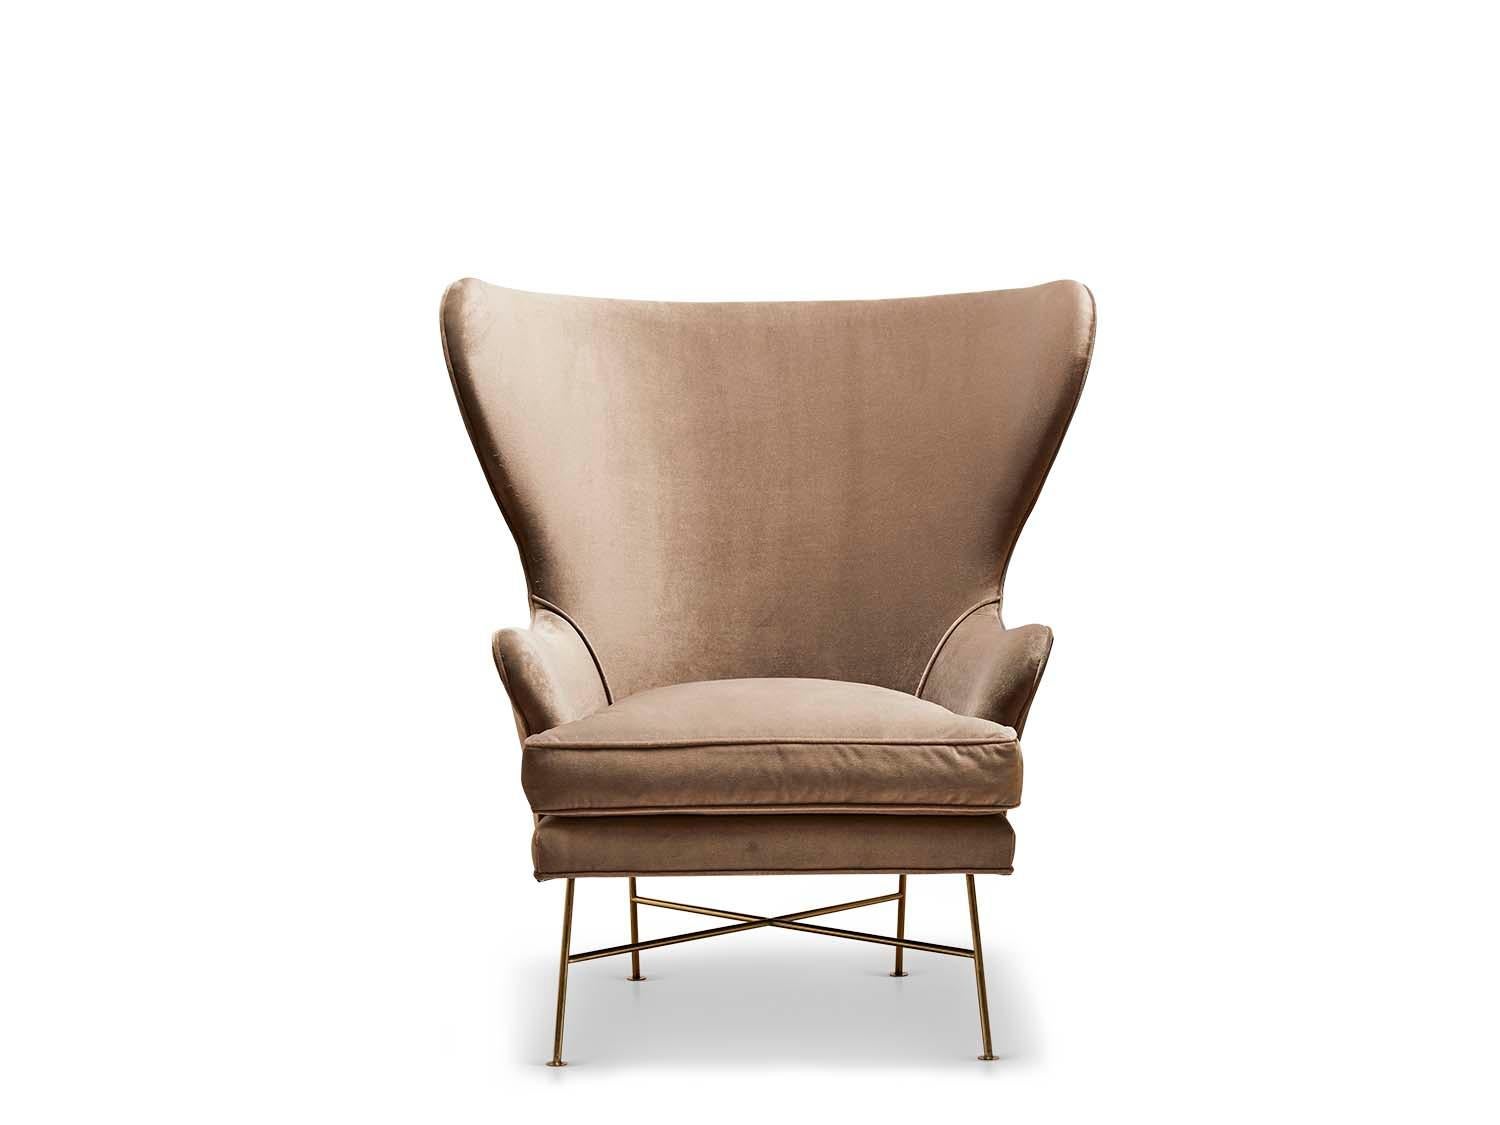 The highland wingback chair is a sculptural, wide-scale chair with a minimal metal base and down-wrapped seat cushion.

 The Lawson-Fenning collection is designed and handmade in Los Angeles, California. Reach out to discover what options are